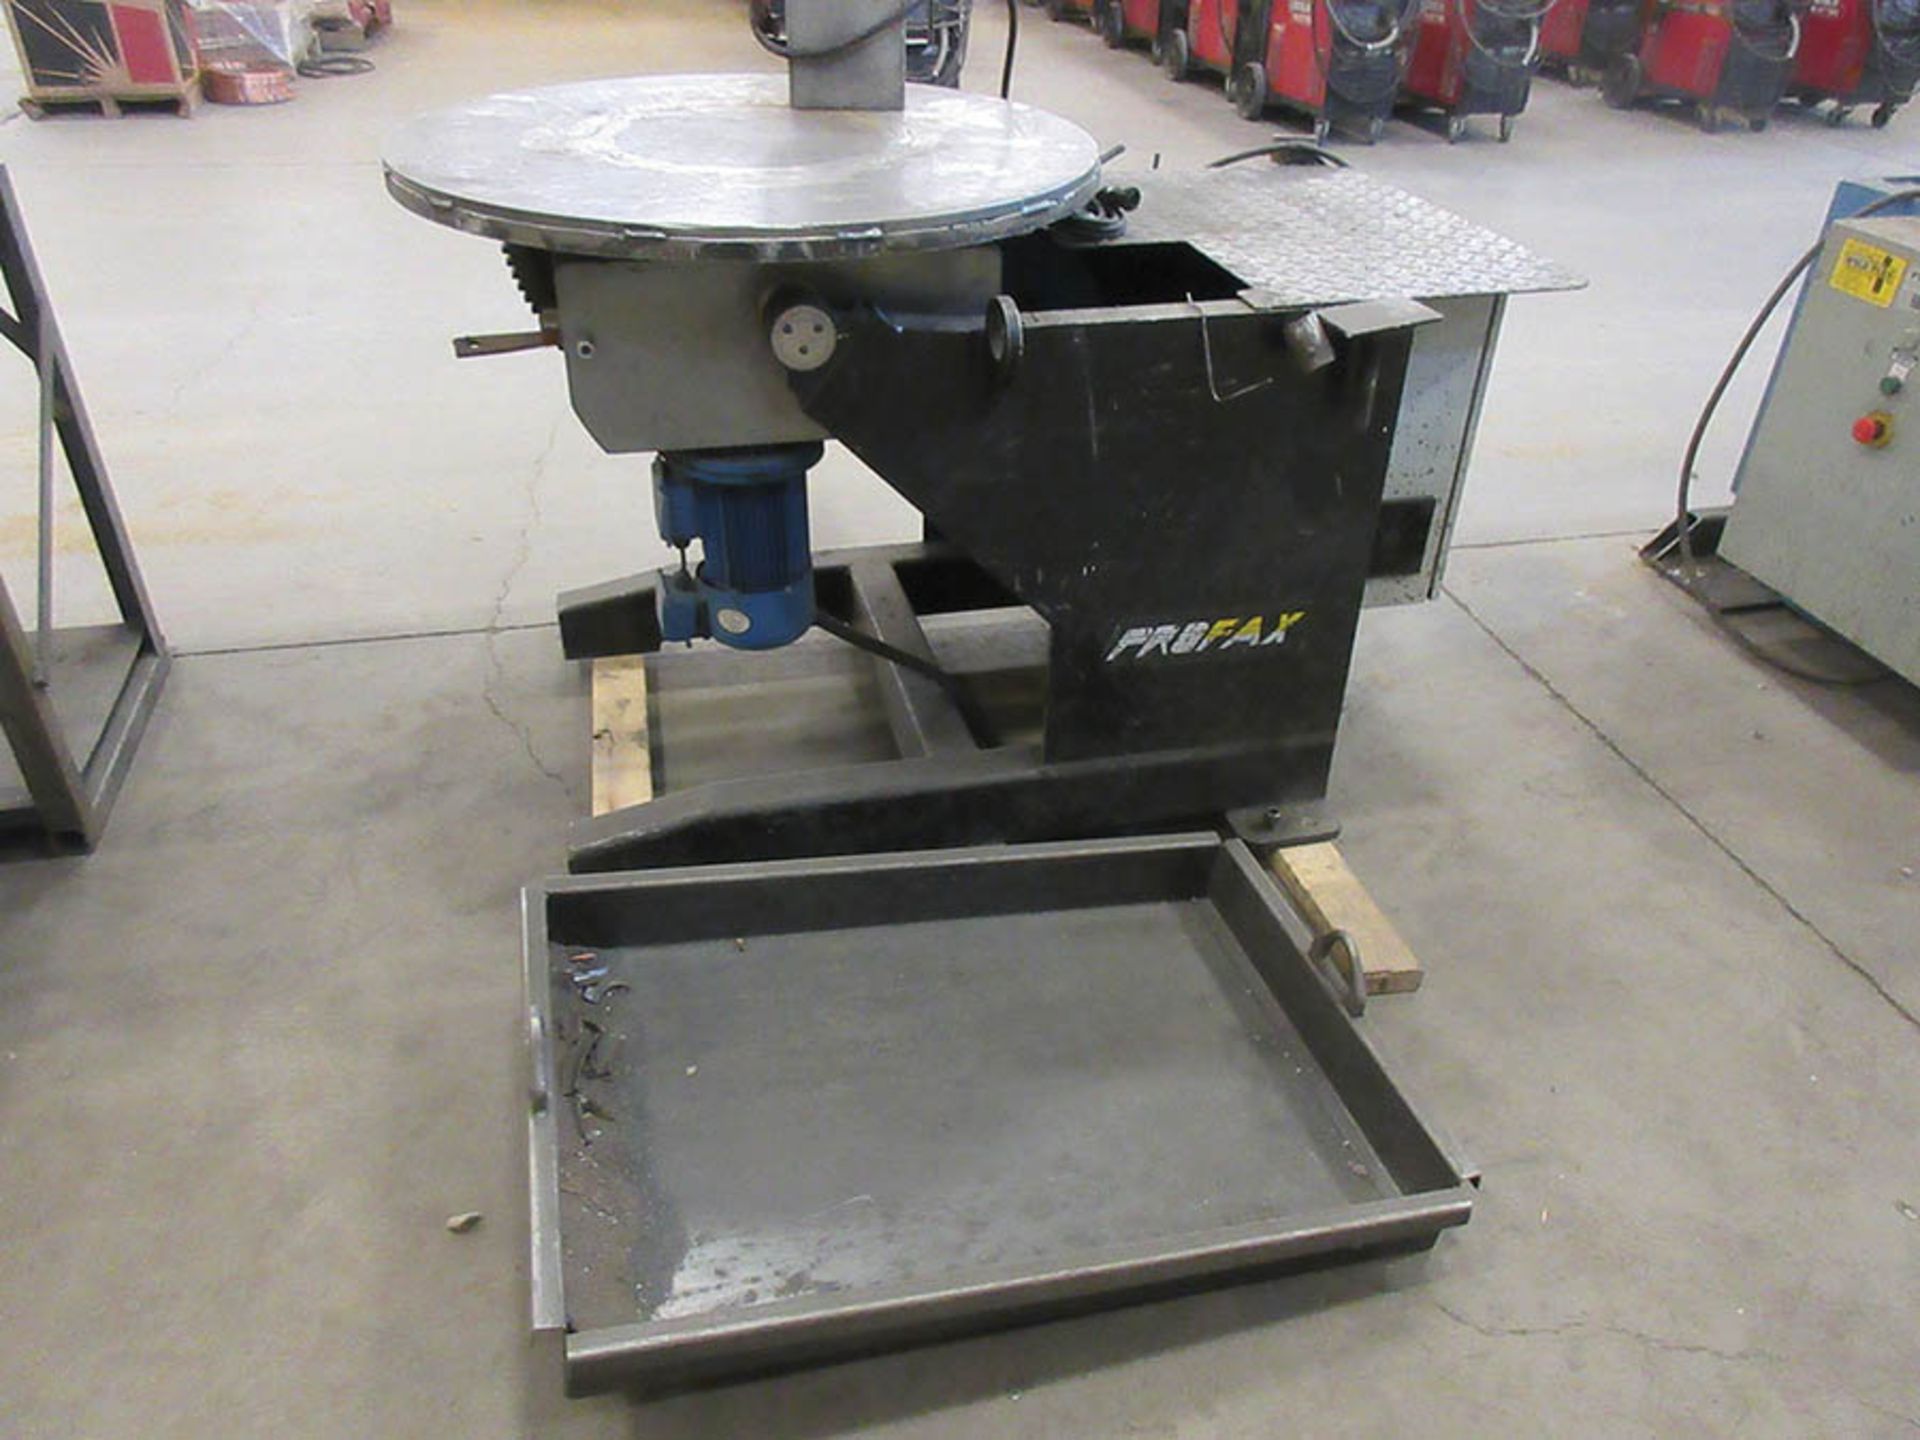 PROFAX WELDING POSITIONER, MODEL: WP-2000-4, LOAD 2000 LBS./V, CAP 3200 LBS./H, TABLE DIA. 35. - Image 3 of 4